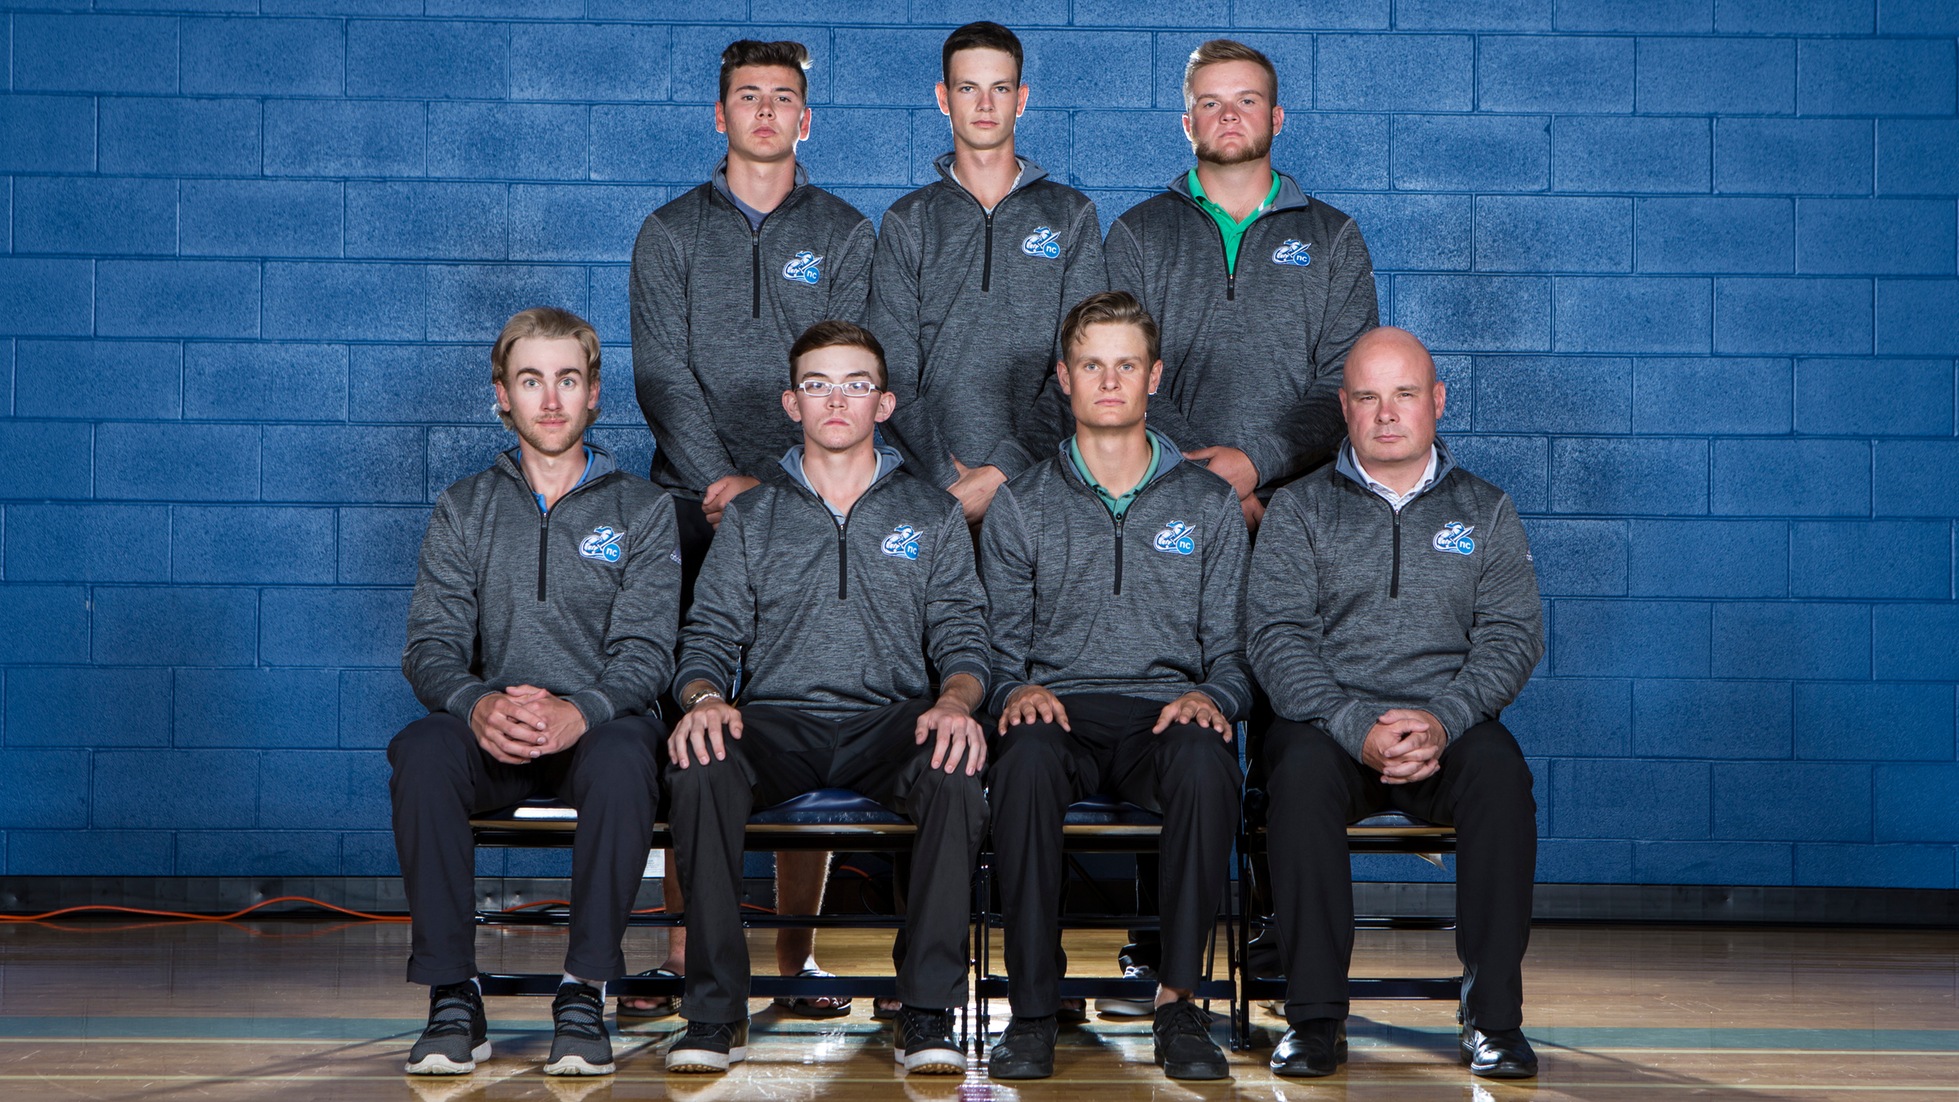 PREVIEW: Defending Knights set to take on OCAA championships